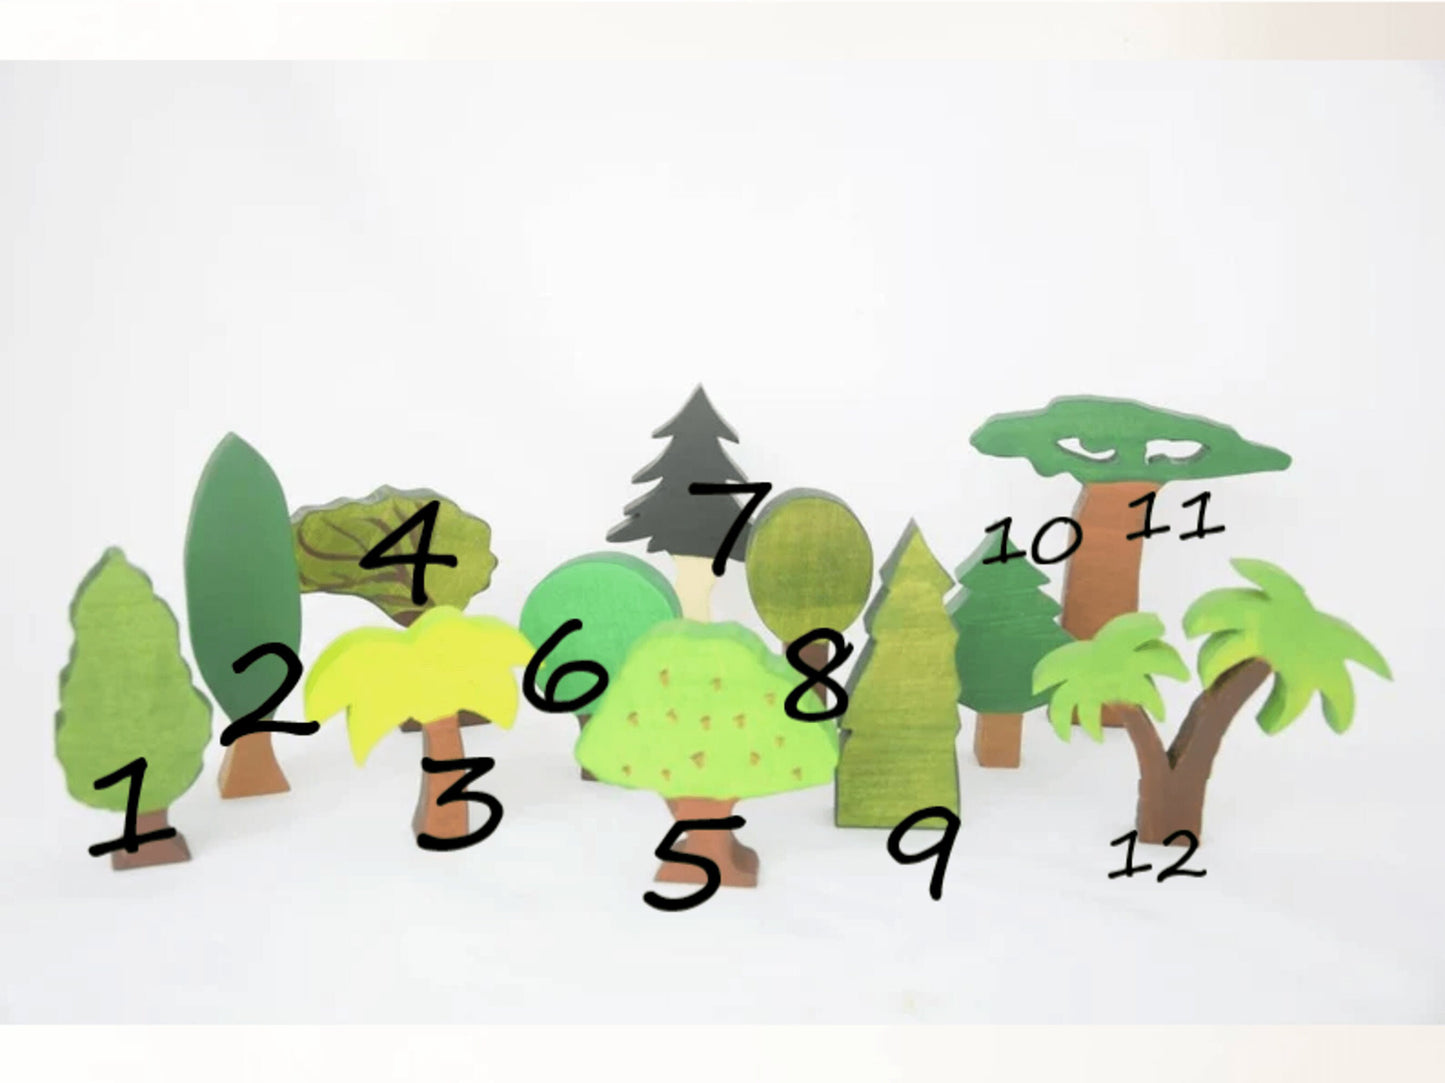 Trees set of nine, wooden forest toy set, wooden trees, wooden play scenes, imaginative play, waldorf trees, gift for kids, forest play set